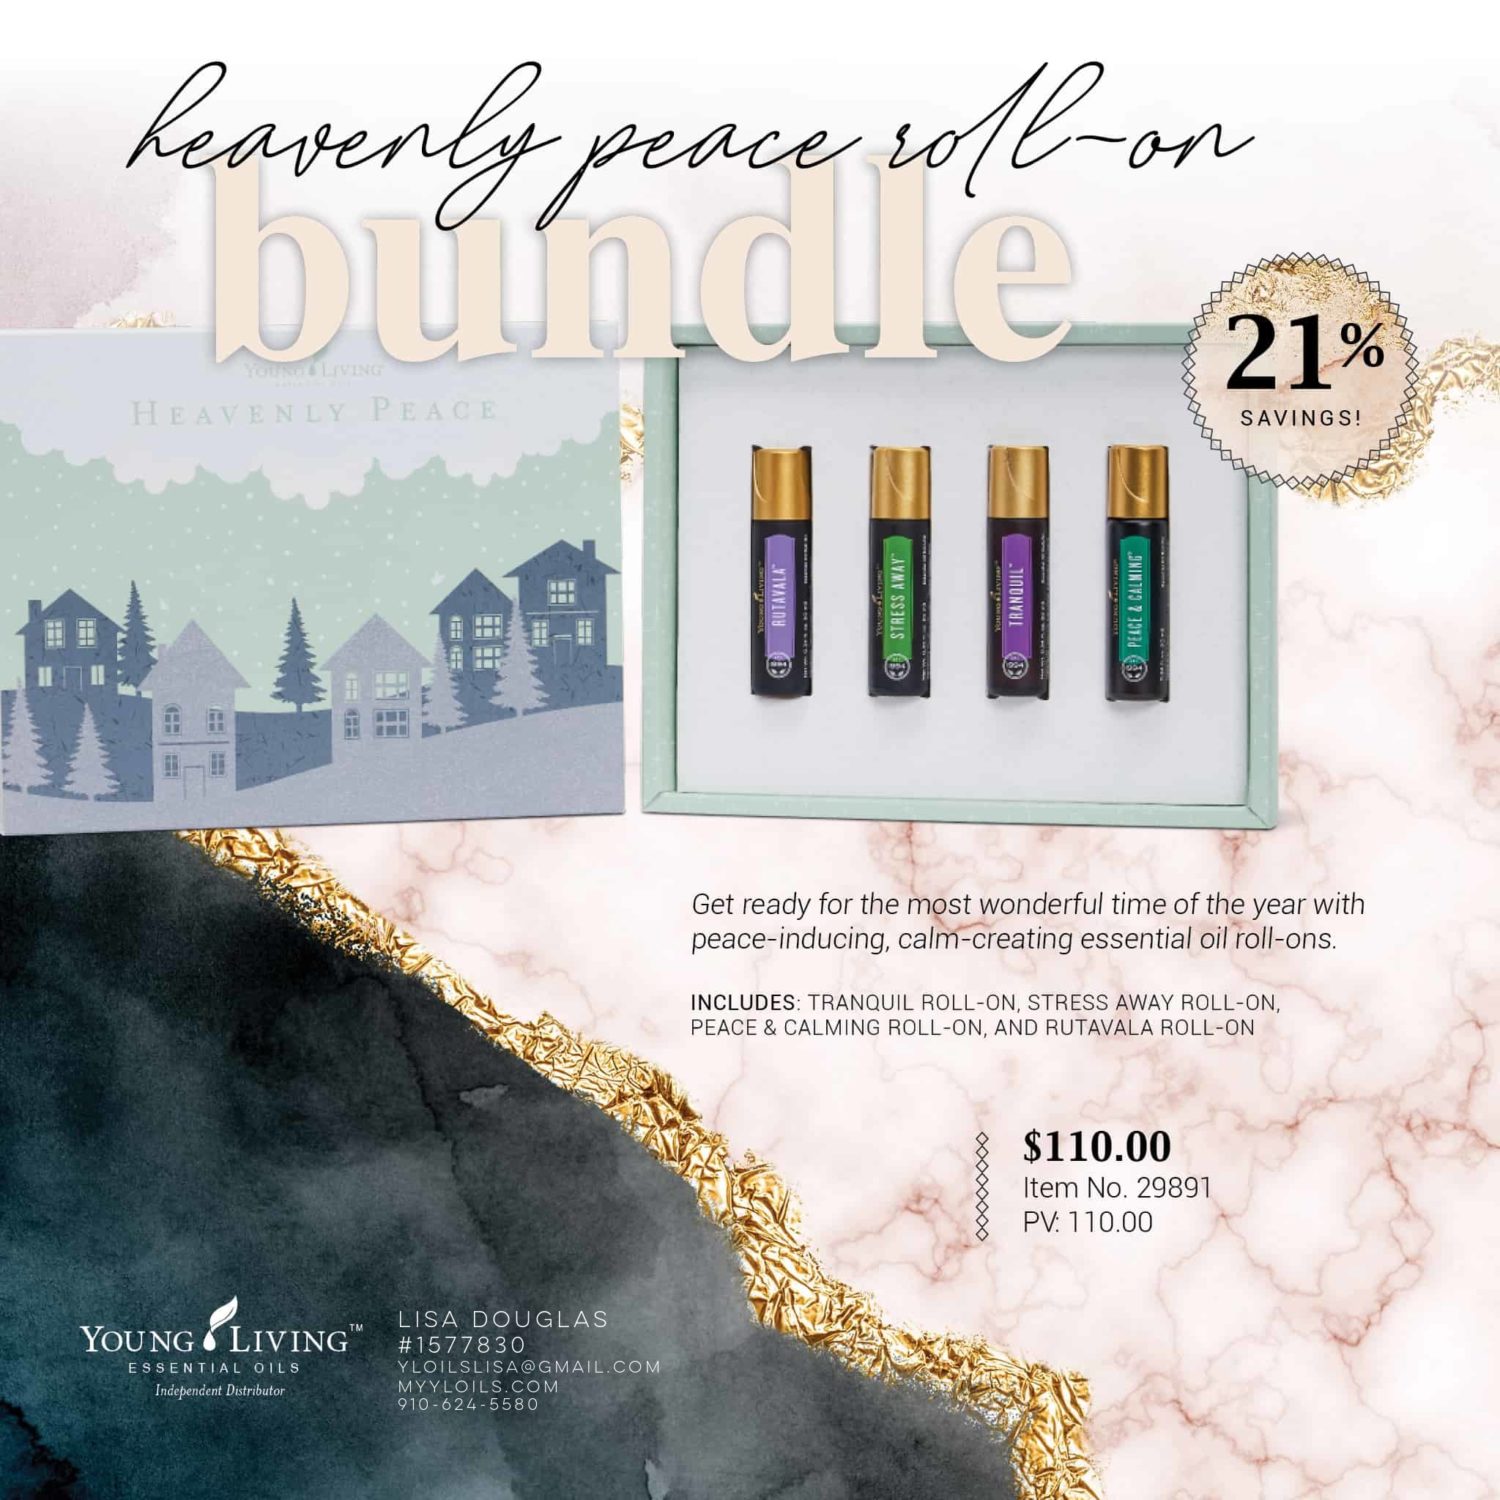 Young Living Heavenly Peace Roll-On Bundle Black Friday 2019